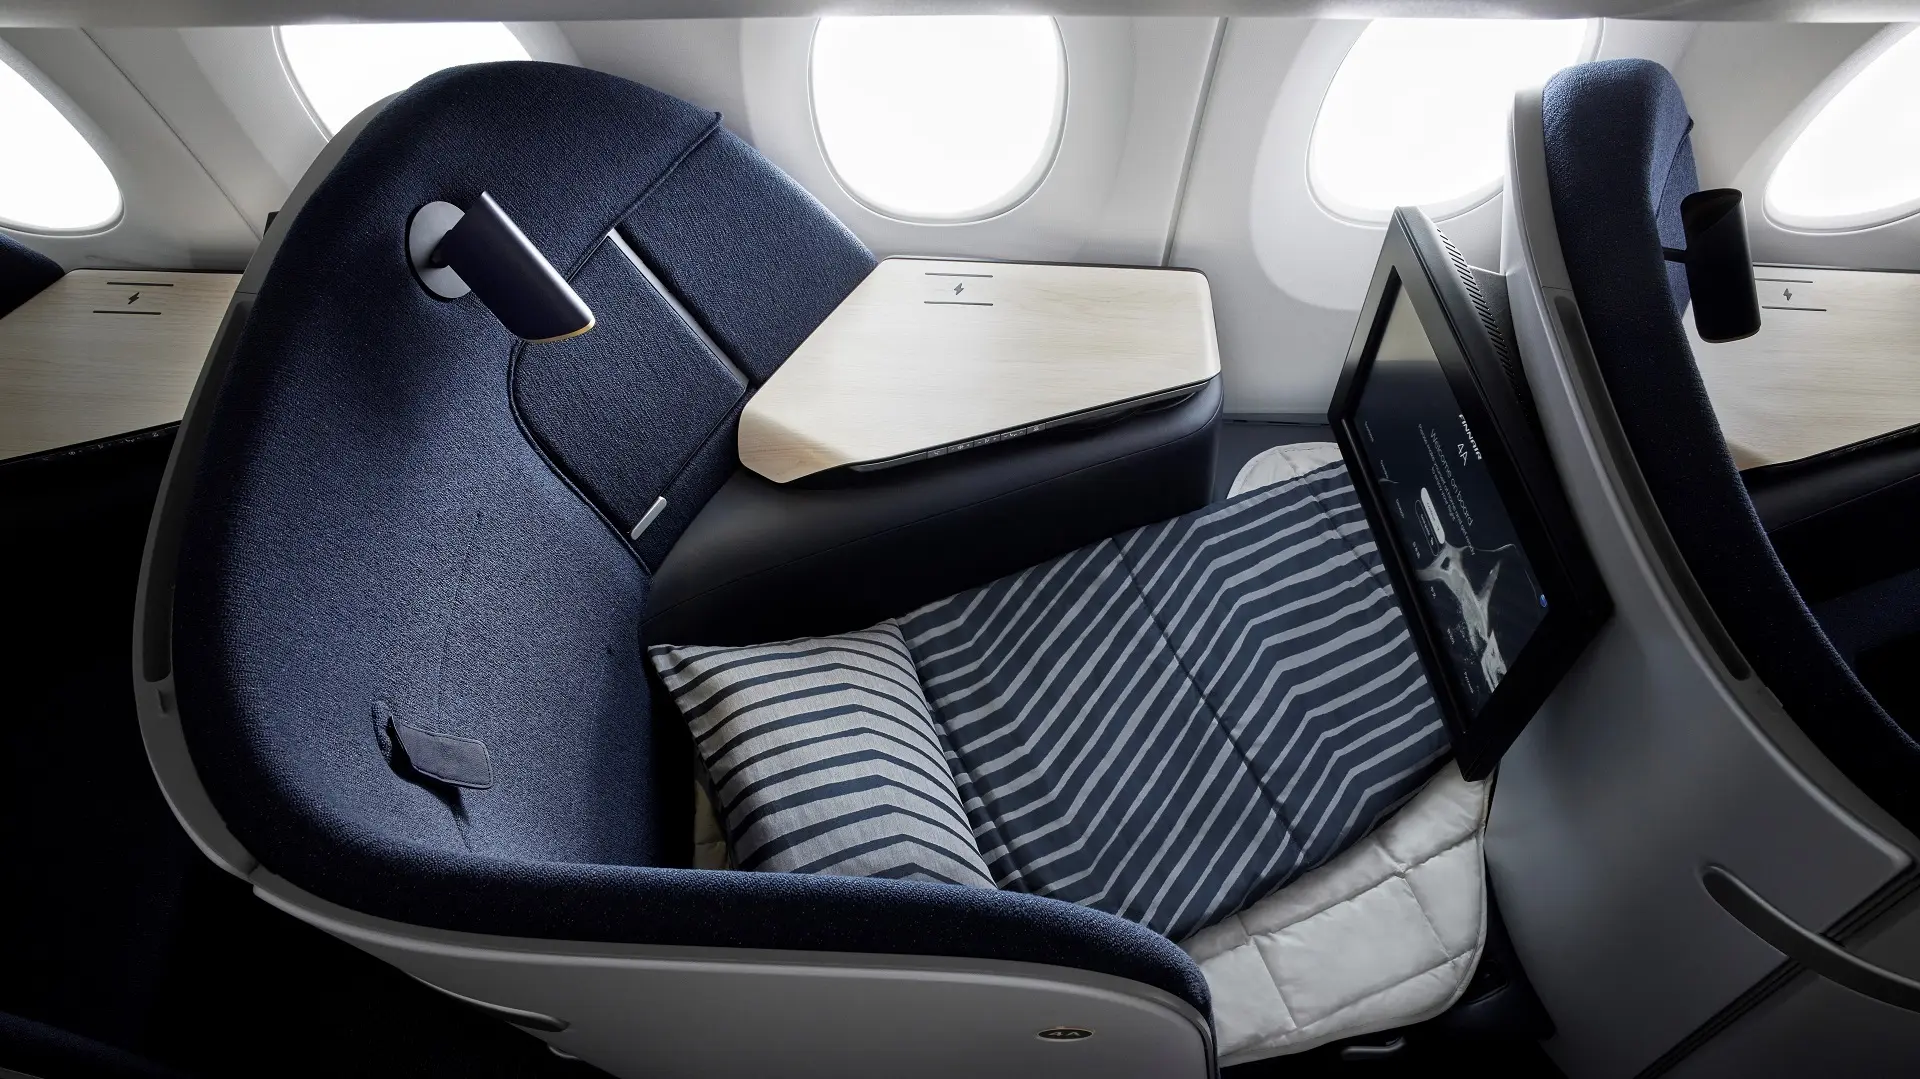 Airline review Cabin & Seat - Finnair - 2